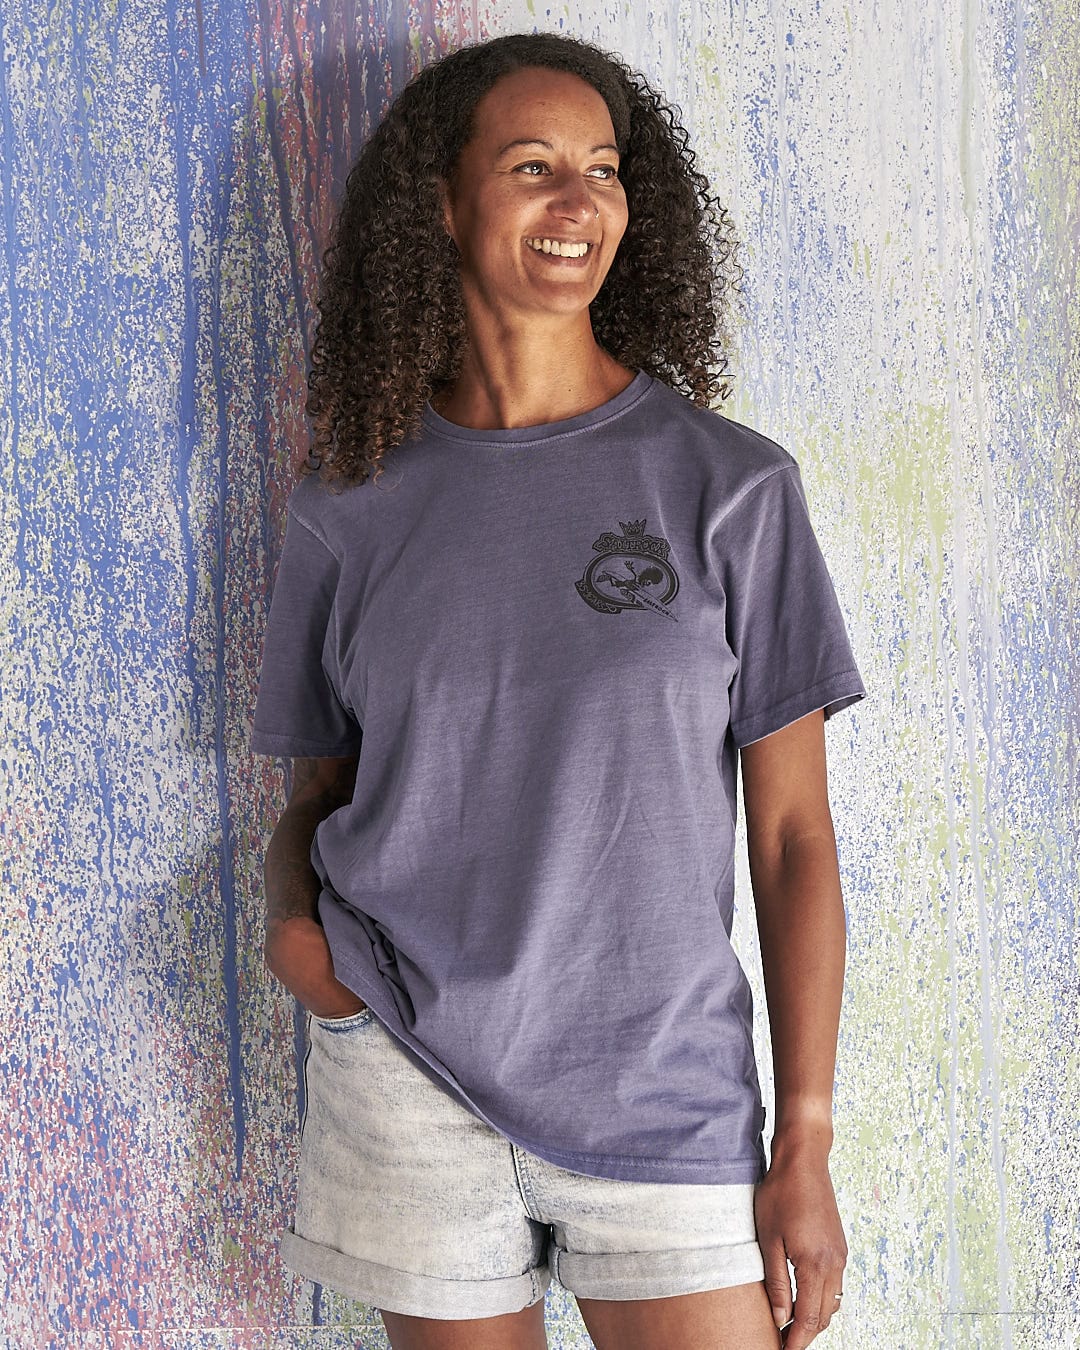 A woman wearing a Tribal Saltrock - Limited Edition 35 Years T-Shirt and shorts is leaning against a wall.